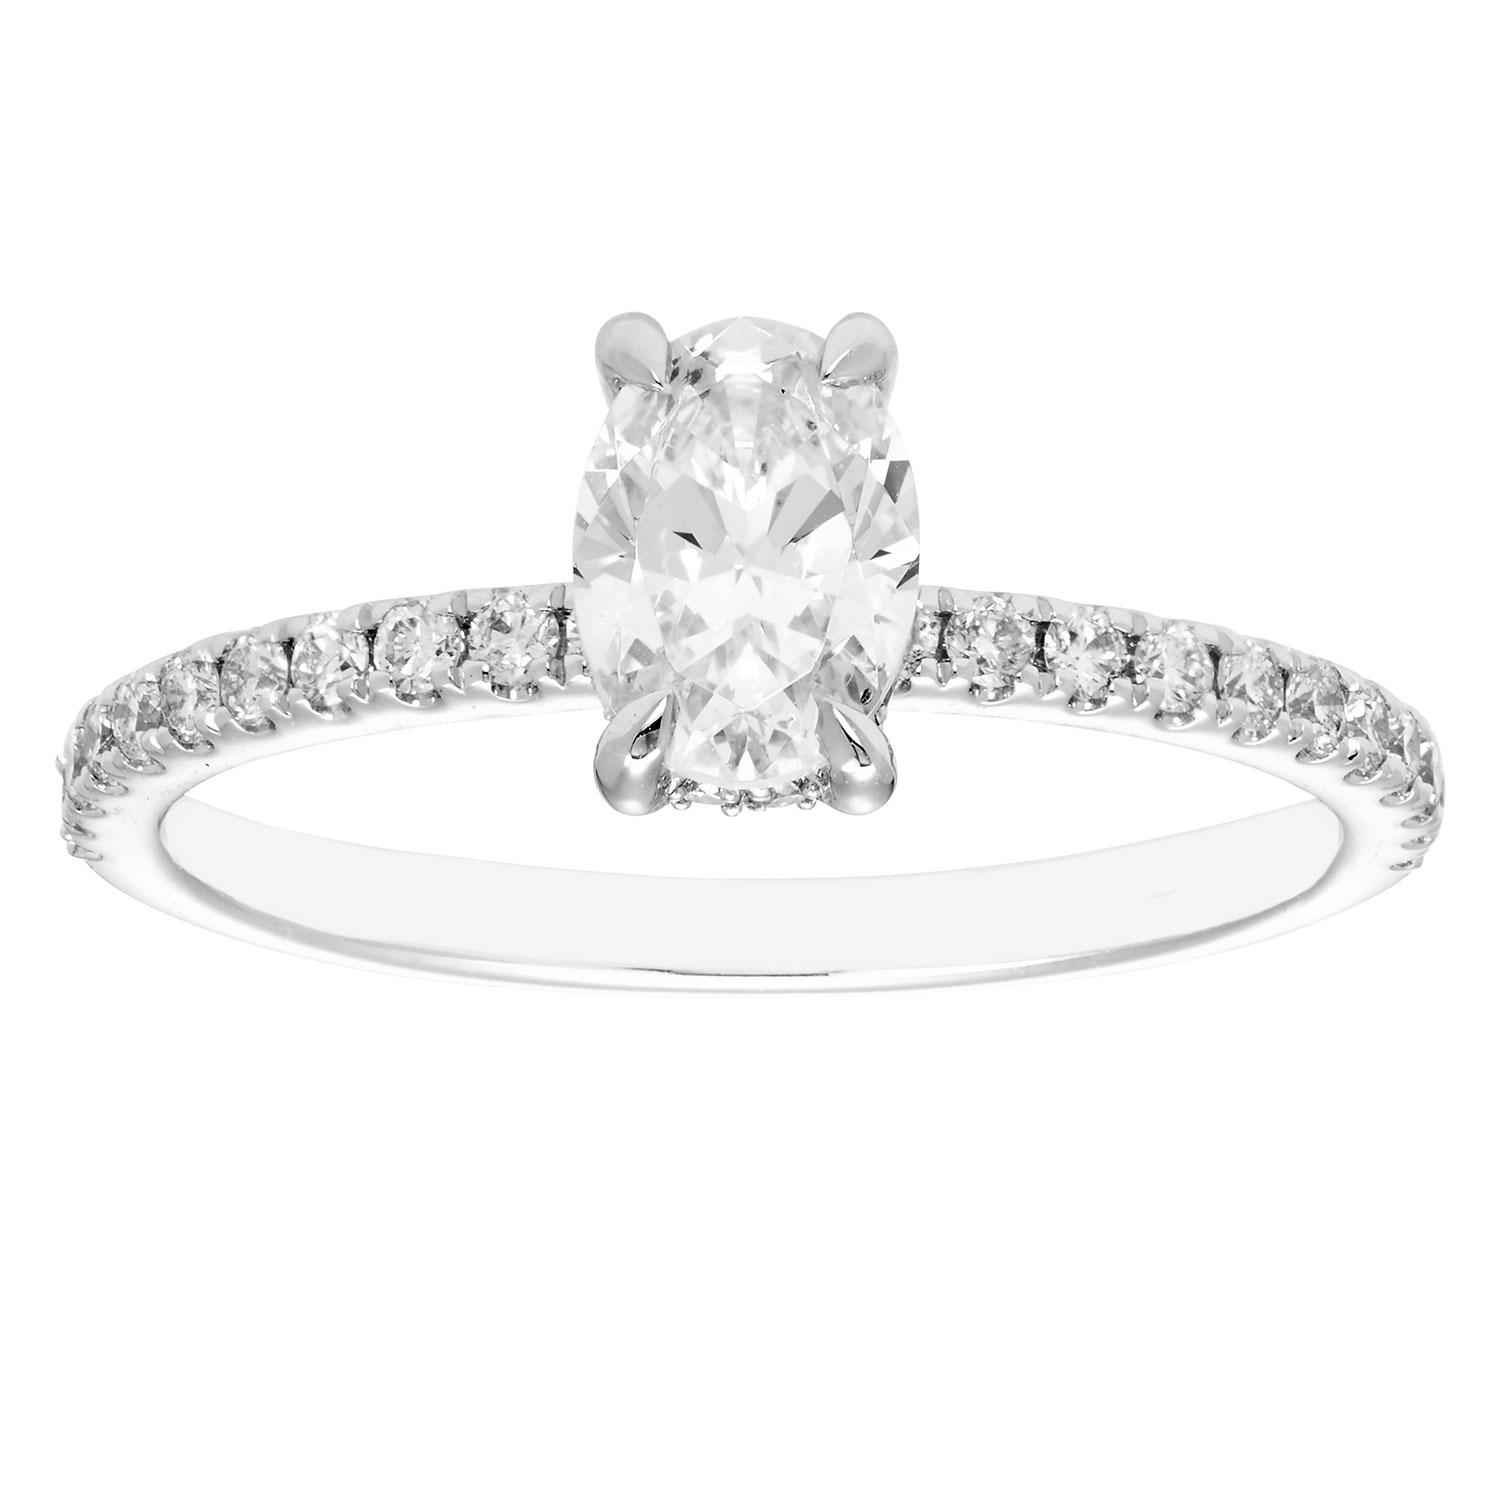 1.06 CT. T.W. Oval Diamond Engagement Ring in 14K White Gold, 6